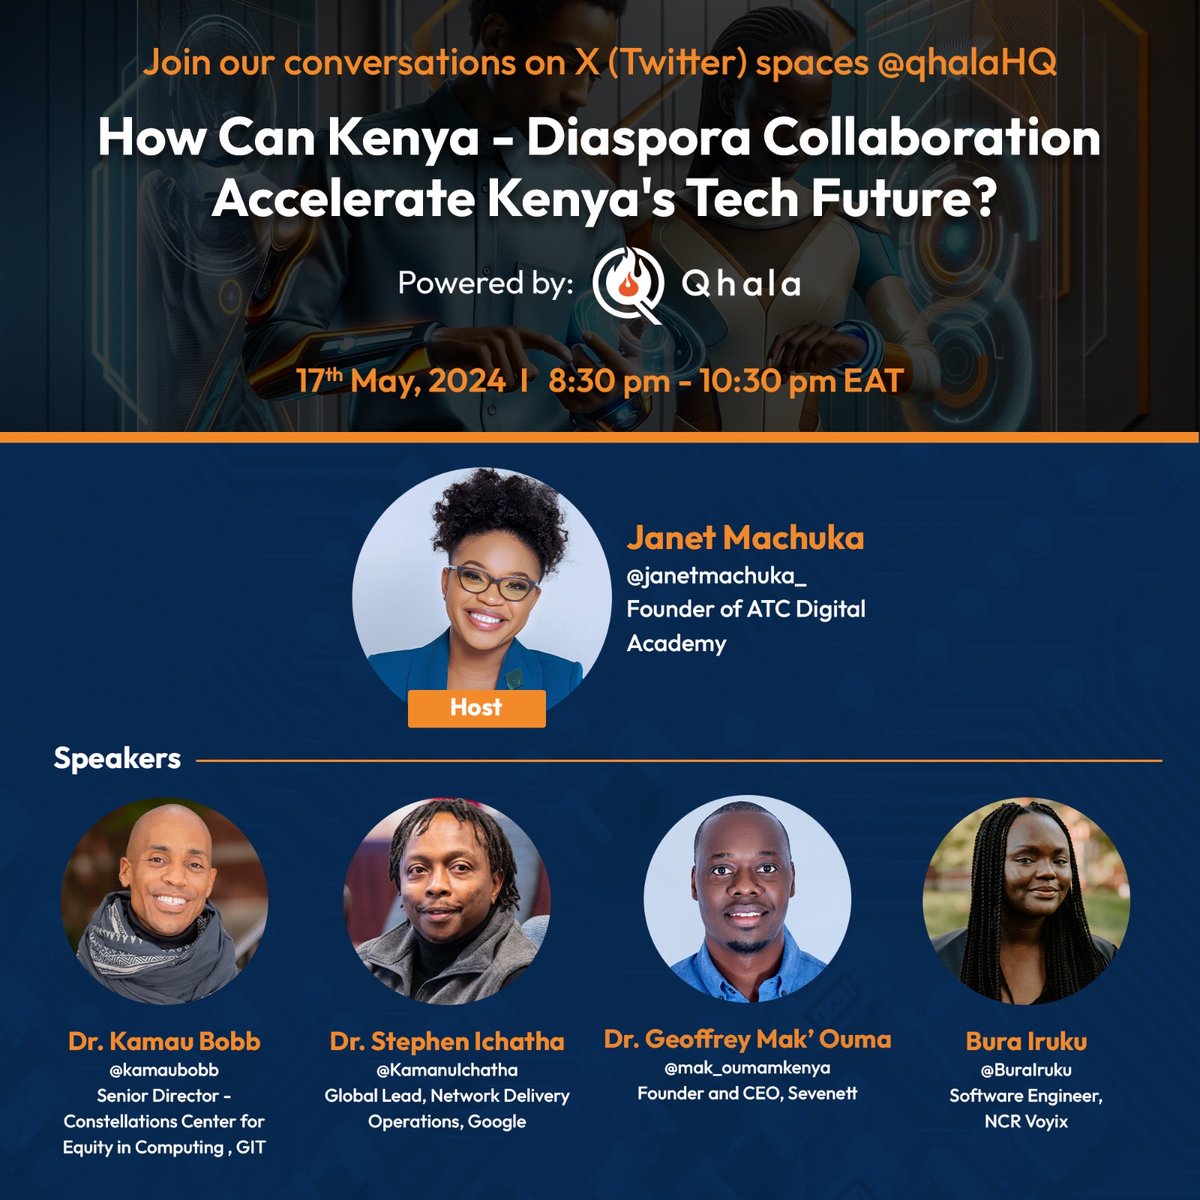 Mark your calendars for our upcoming X Space Event where we'll explore how Kenya-Diaspora collaboration is accelerating Kenya's tech future. x.com/i/spaces/1yokm… Don't miss out on this exciting discussion! #KenyaTech #DiasporaCollaboration